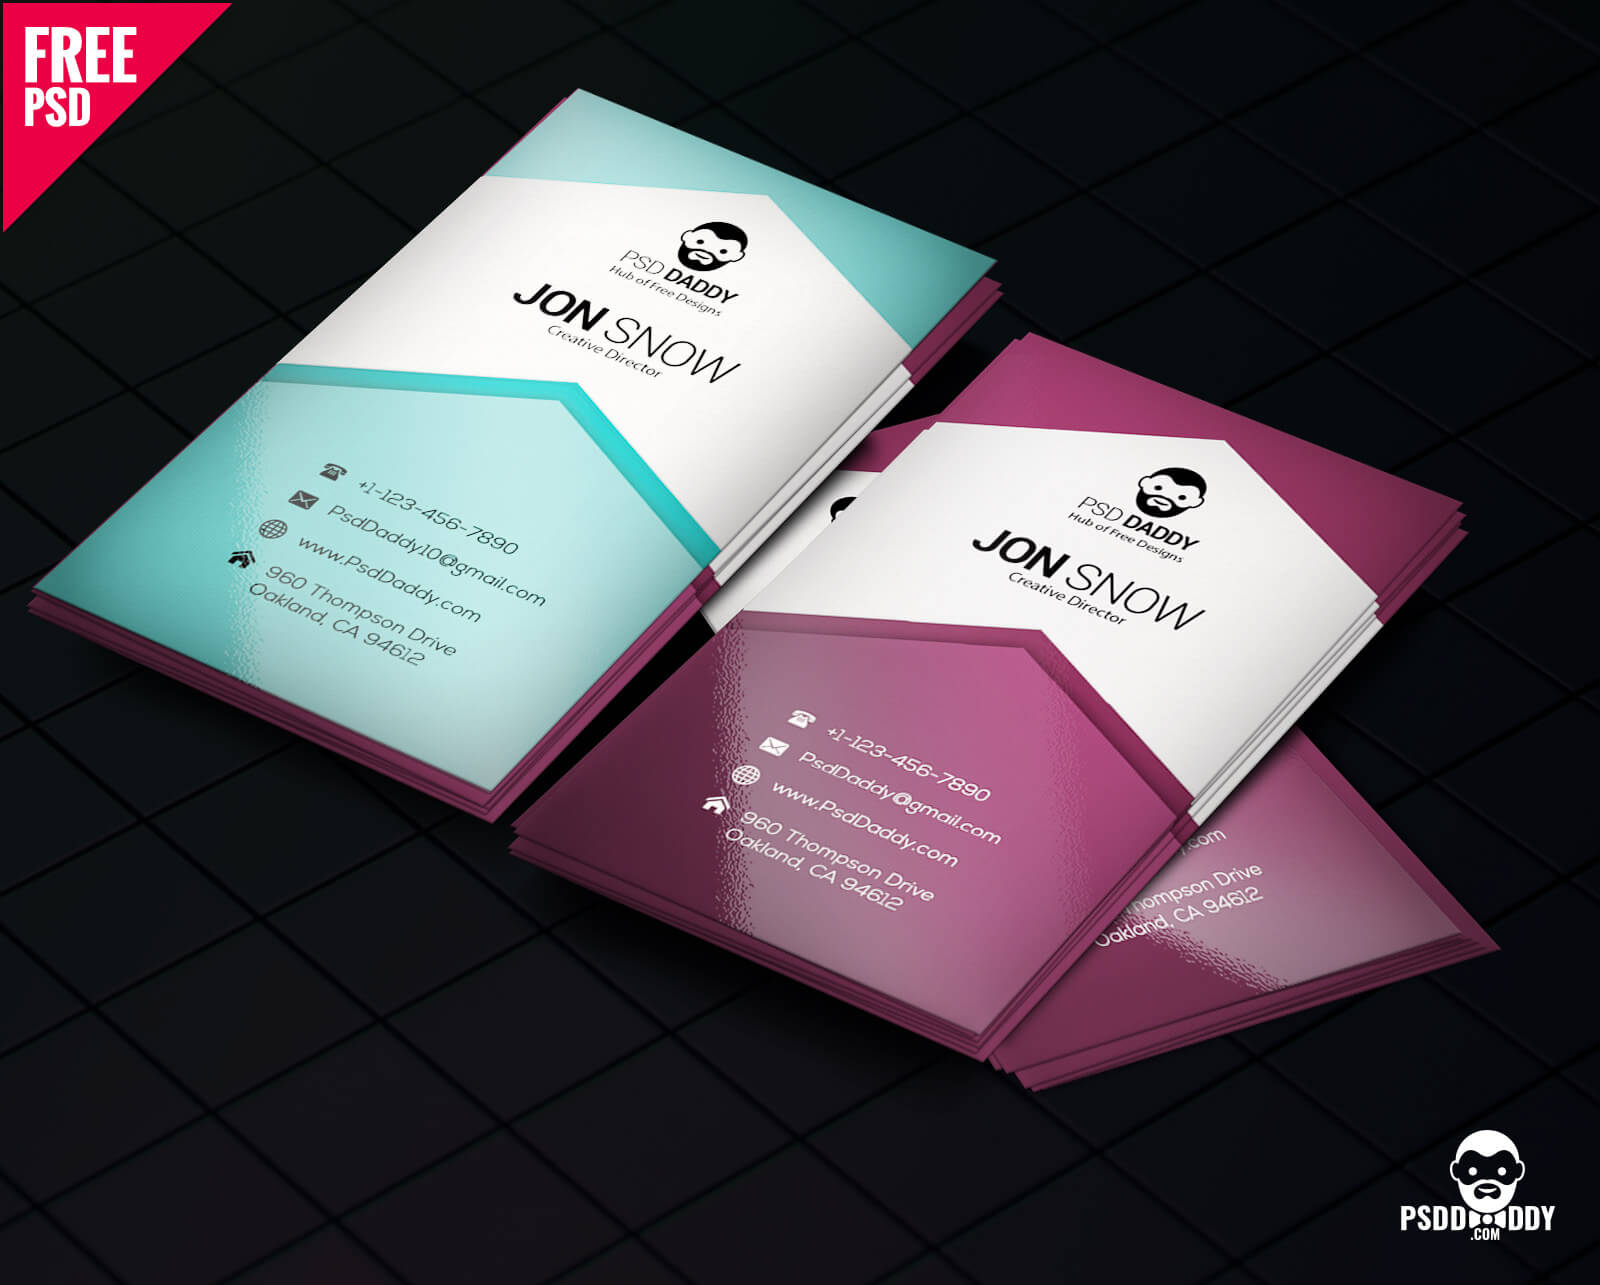 Download]Creative Business Card Psd Free | Psddaddy Inside Business Card Size Template Photoshop